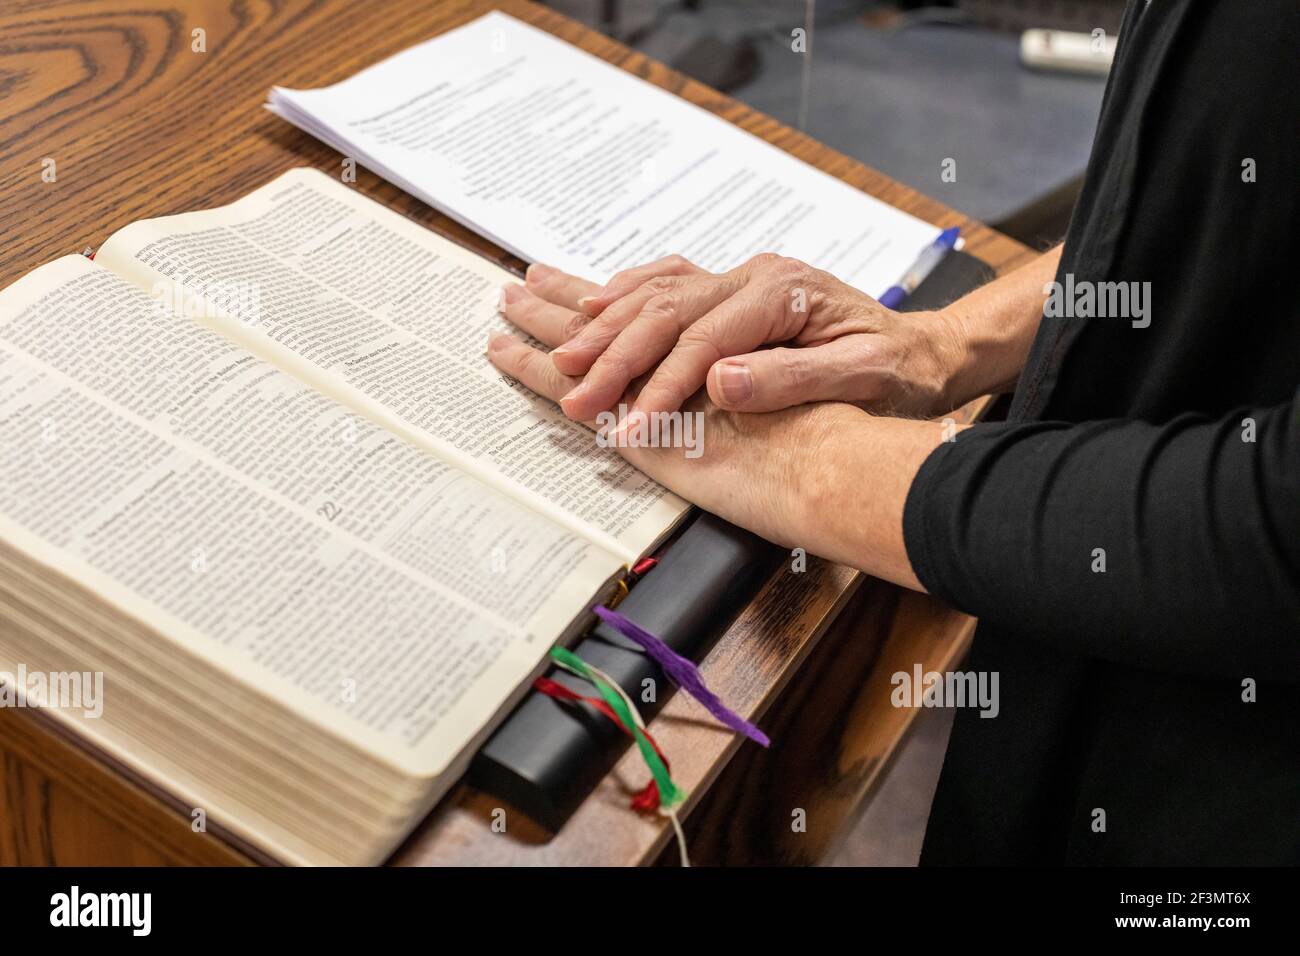 Detroit, Michigan - Dr. Mary Healy, professor of Sacred Scripture at Sacred Heart Major Seminary, reads from the Bible before teaching a class to deac Stock Photo